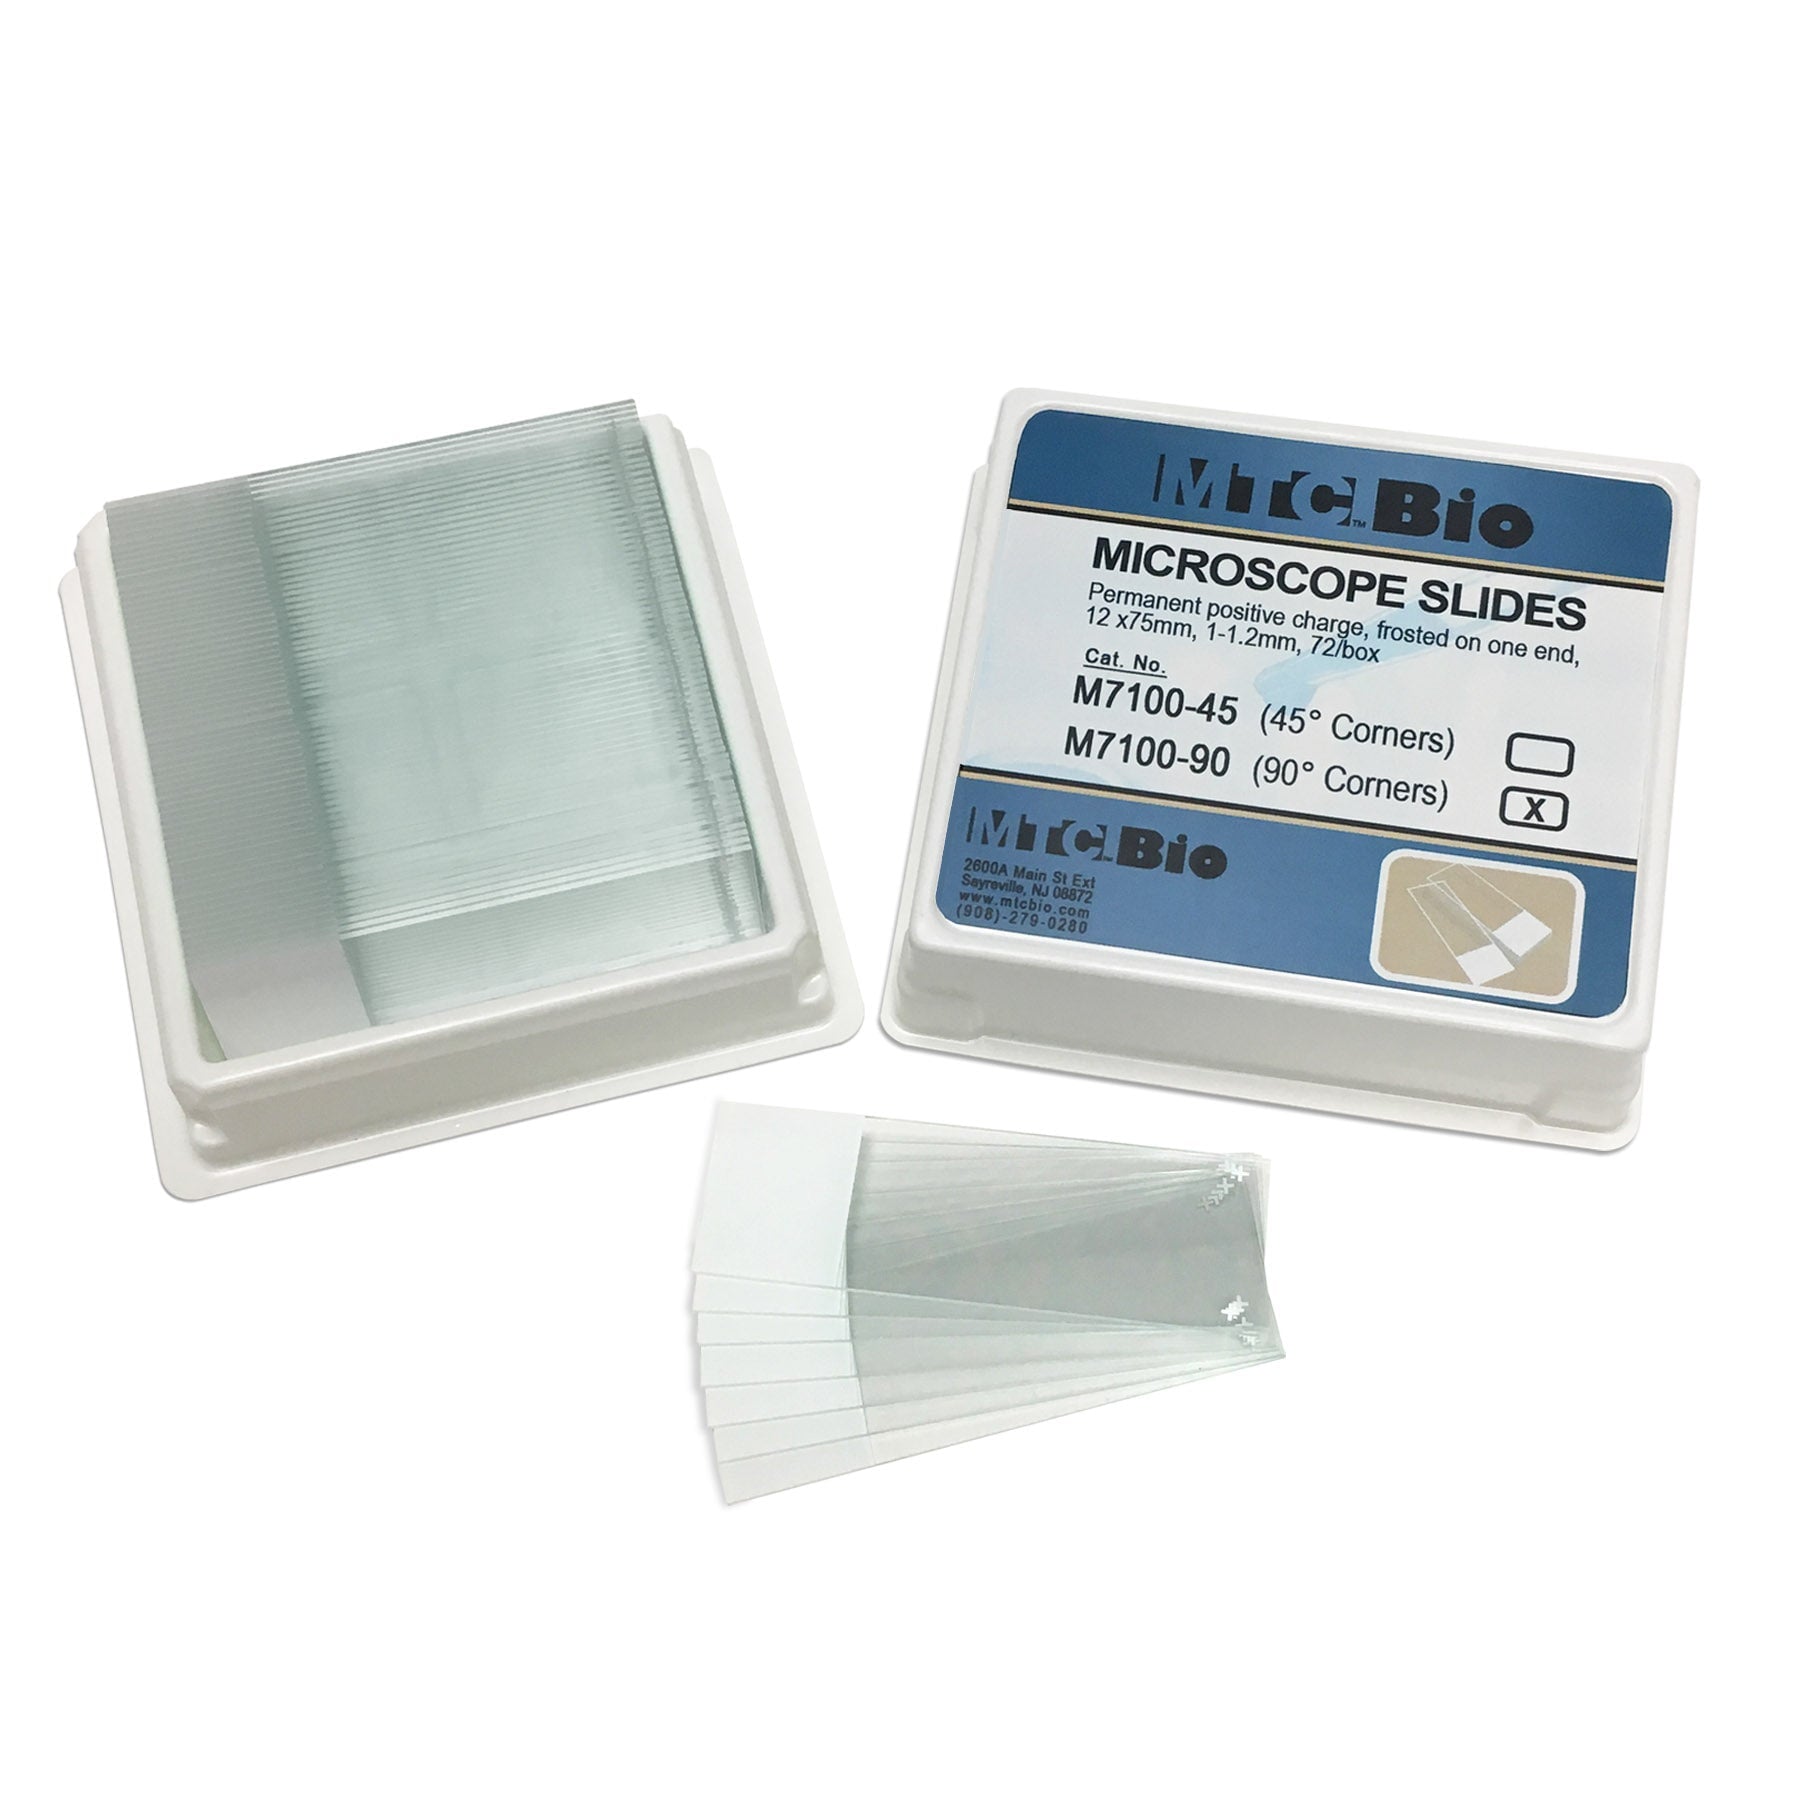 MTC Bio M7100-45 Microscope slides, positive charged, 45° corners, frosted on one end, 25 x 75mm